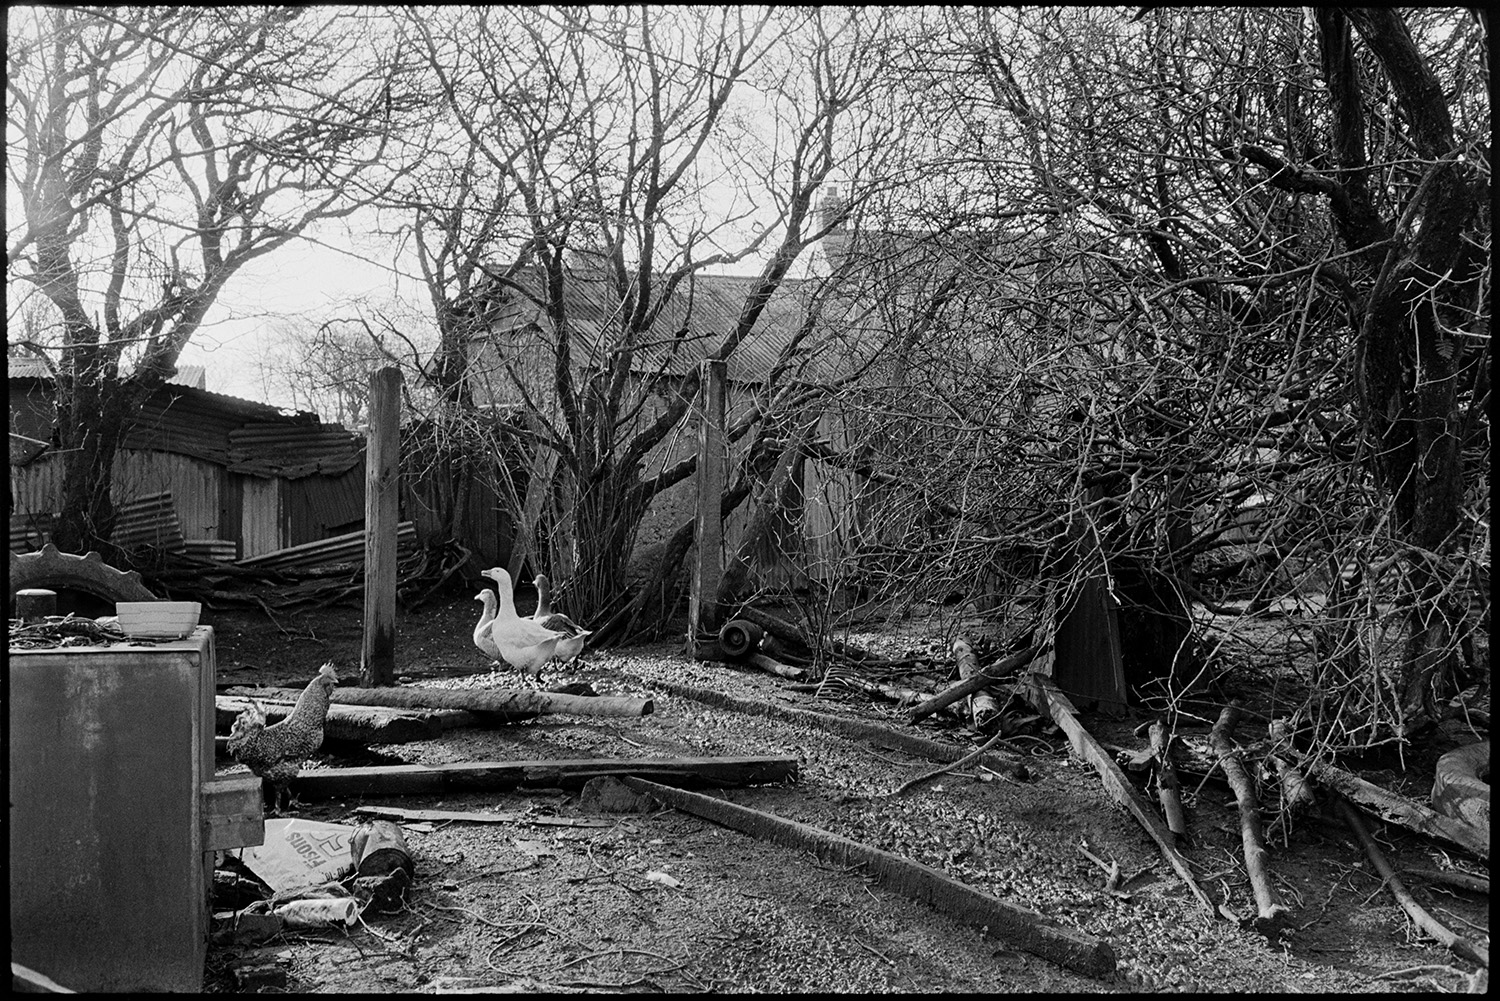 Mucky farmyard, geese, cows, mud, snowdrops in old orchard, tractor. 
[Geese and a cockerel in a muddy farmyard at Cuppers Piece, Beaford. Wooden poles, timber and corrugated iron barns can be seen in the farmyard amongst trees.]